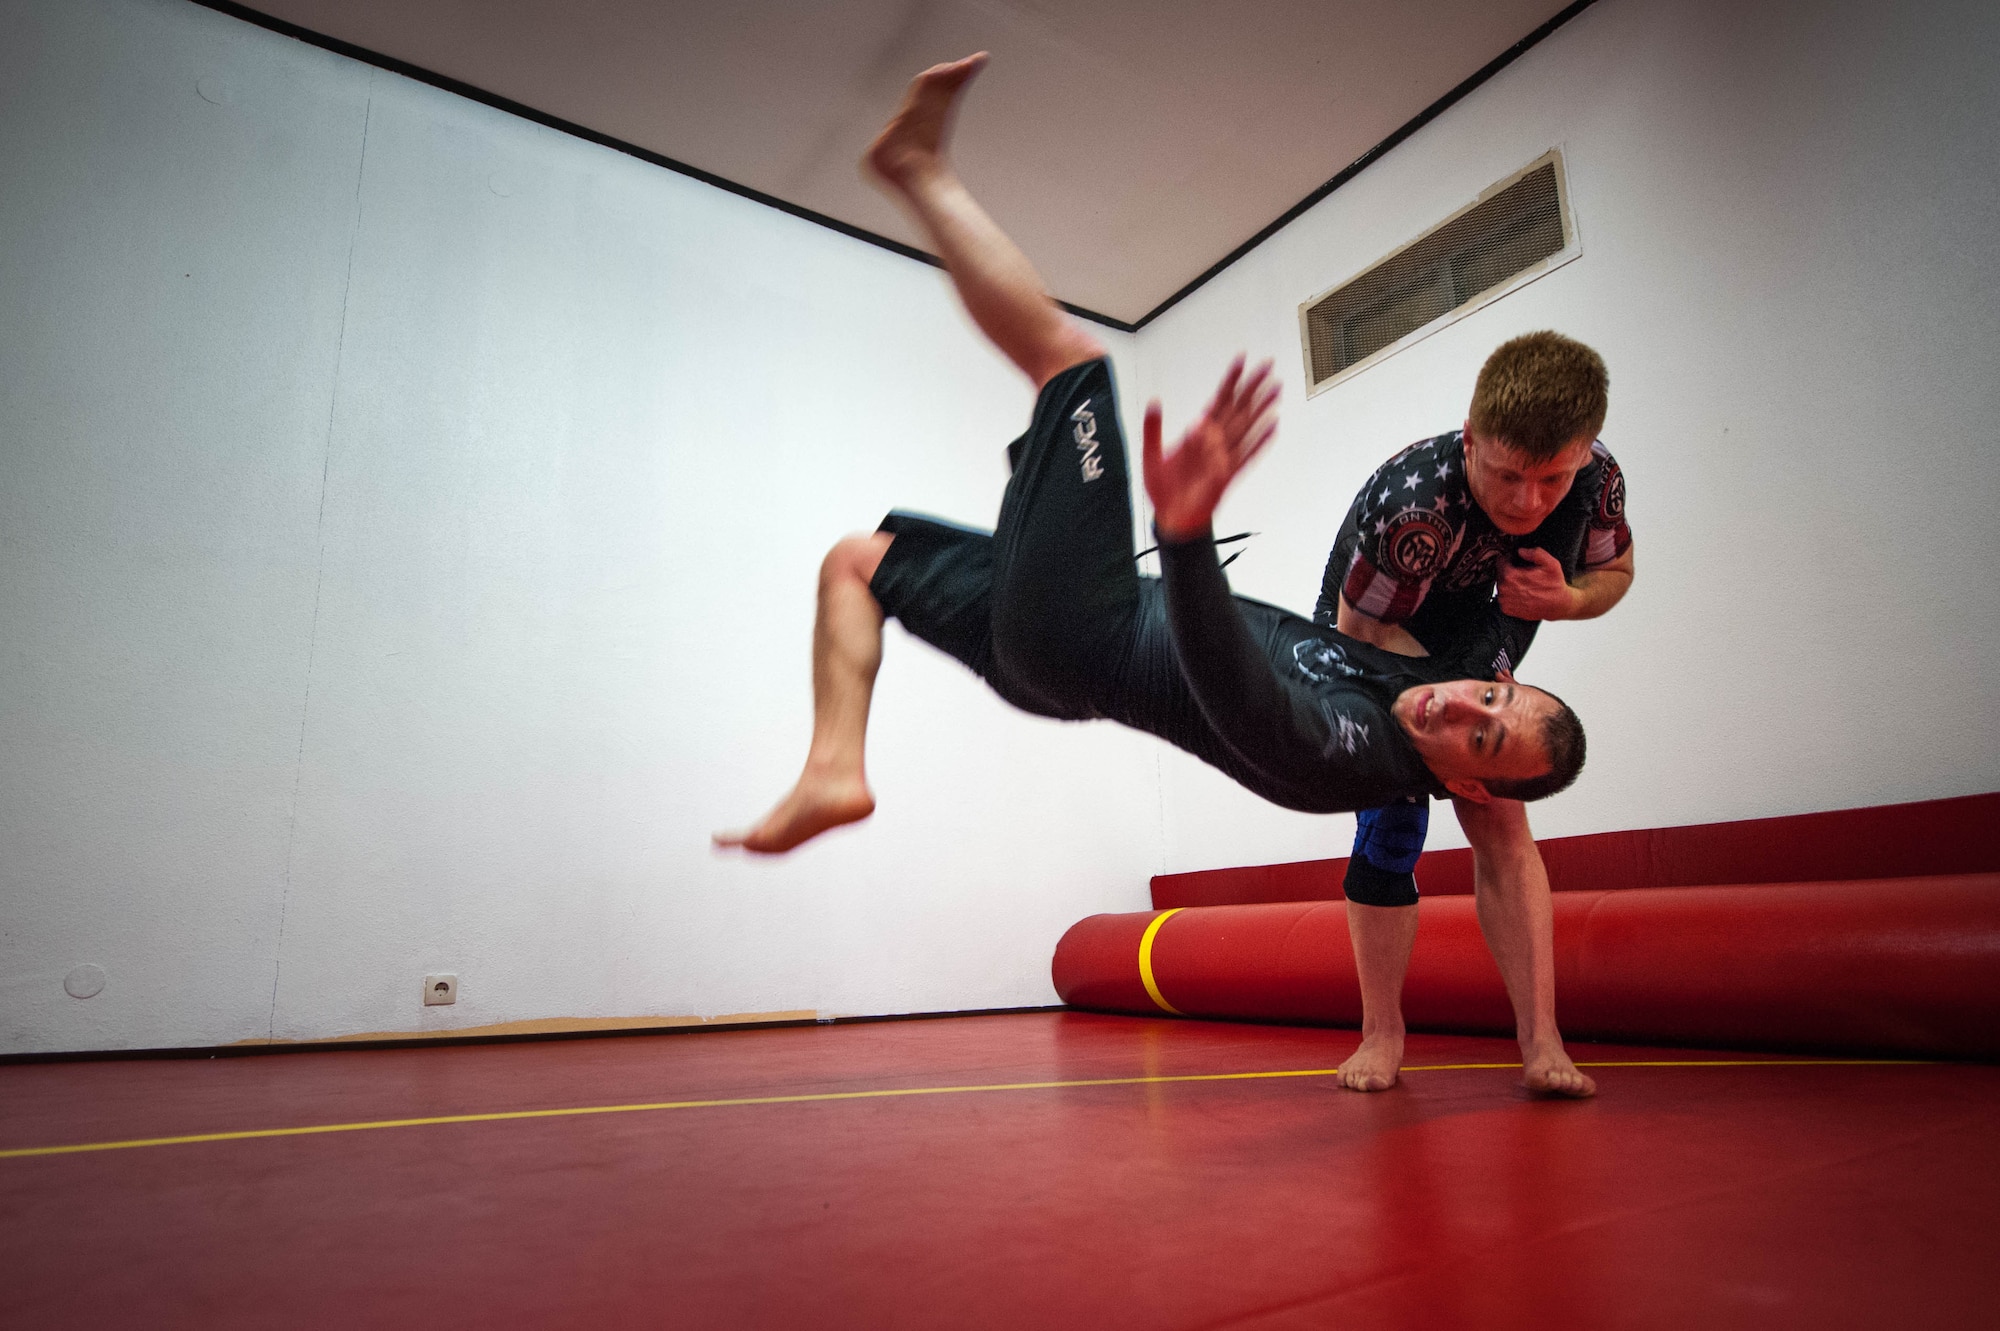 U.S. Air Force Staff Sgt. Joseph Everett, 86th Aircraft Maintenance Squadron aerospace maintenance craftsman, flips Emir Mulic over his shoulder during Brazilian Jiu Jitsu training on Ramstein Air Base, Germany, April 5, 2017. The one arm shoulder throw is a Judo move traditionally named Ippon Seoi Nage. (U.S. Air Force photo by Senior Airman Devin Boyer/Released)